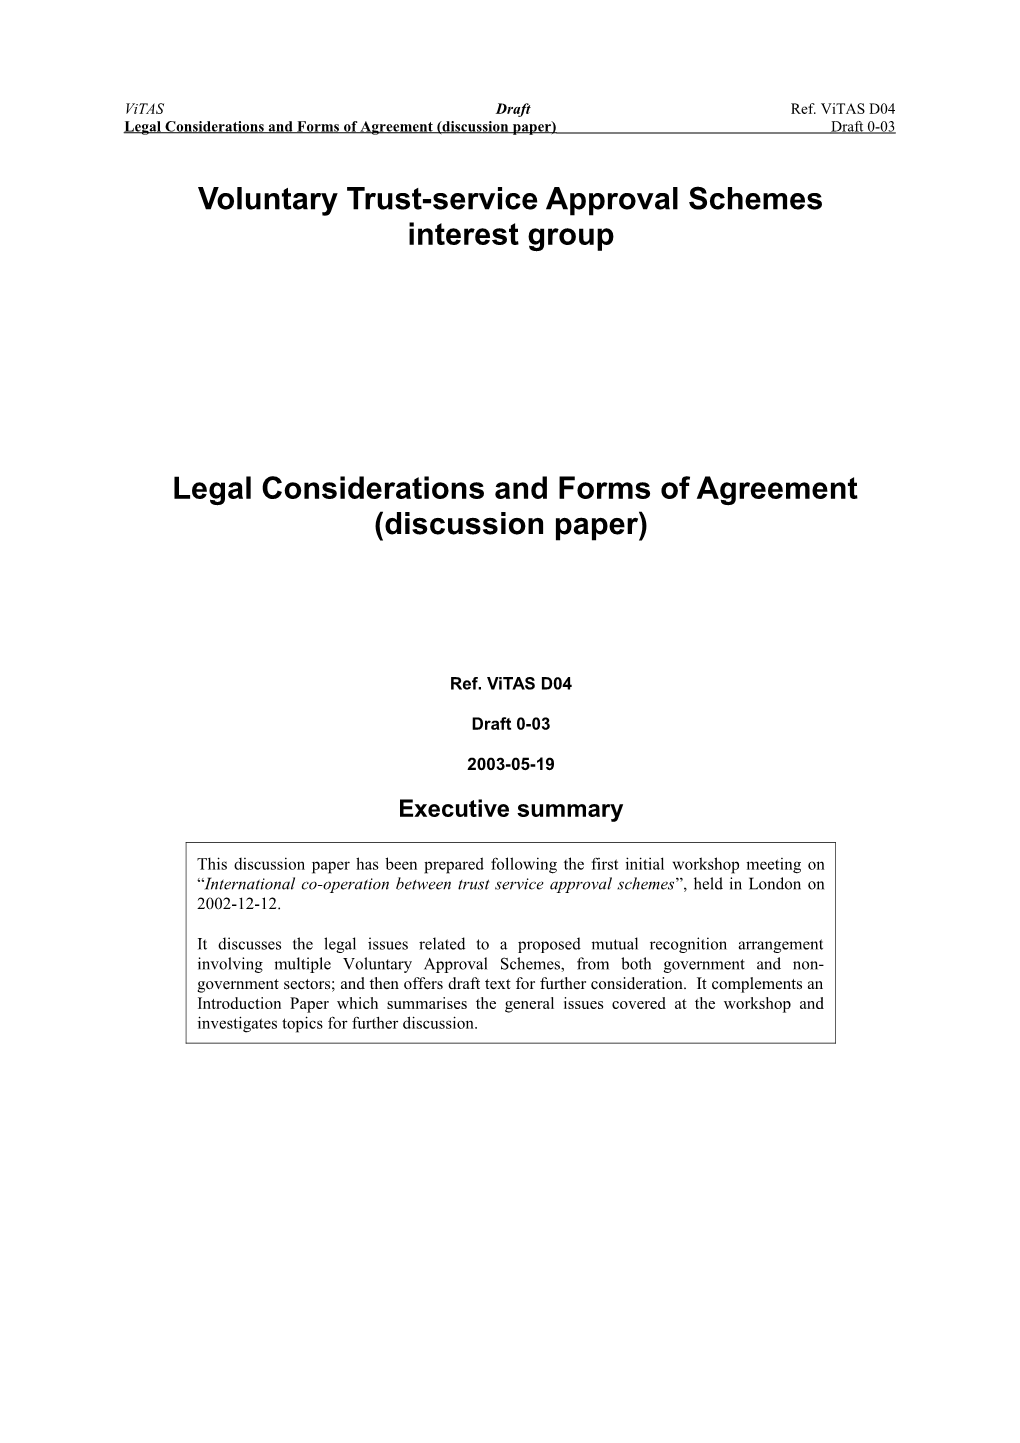 Legal Considerations and Forms of Agreement (Discussion Paper)